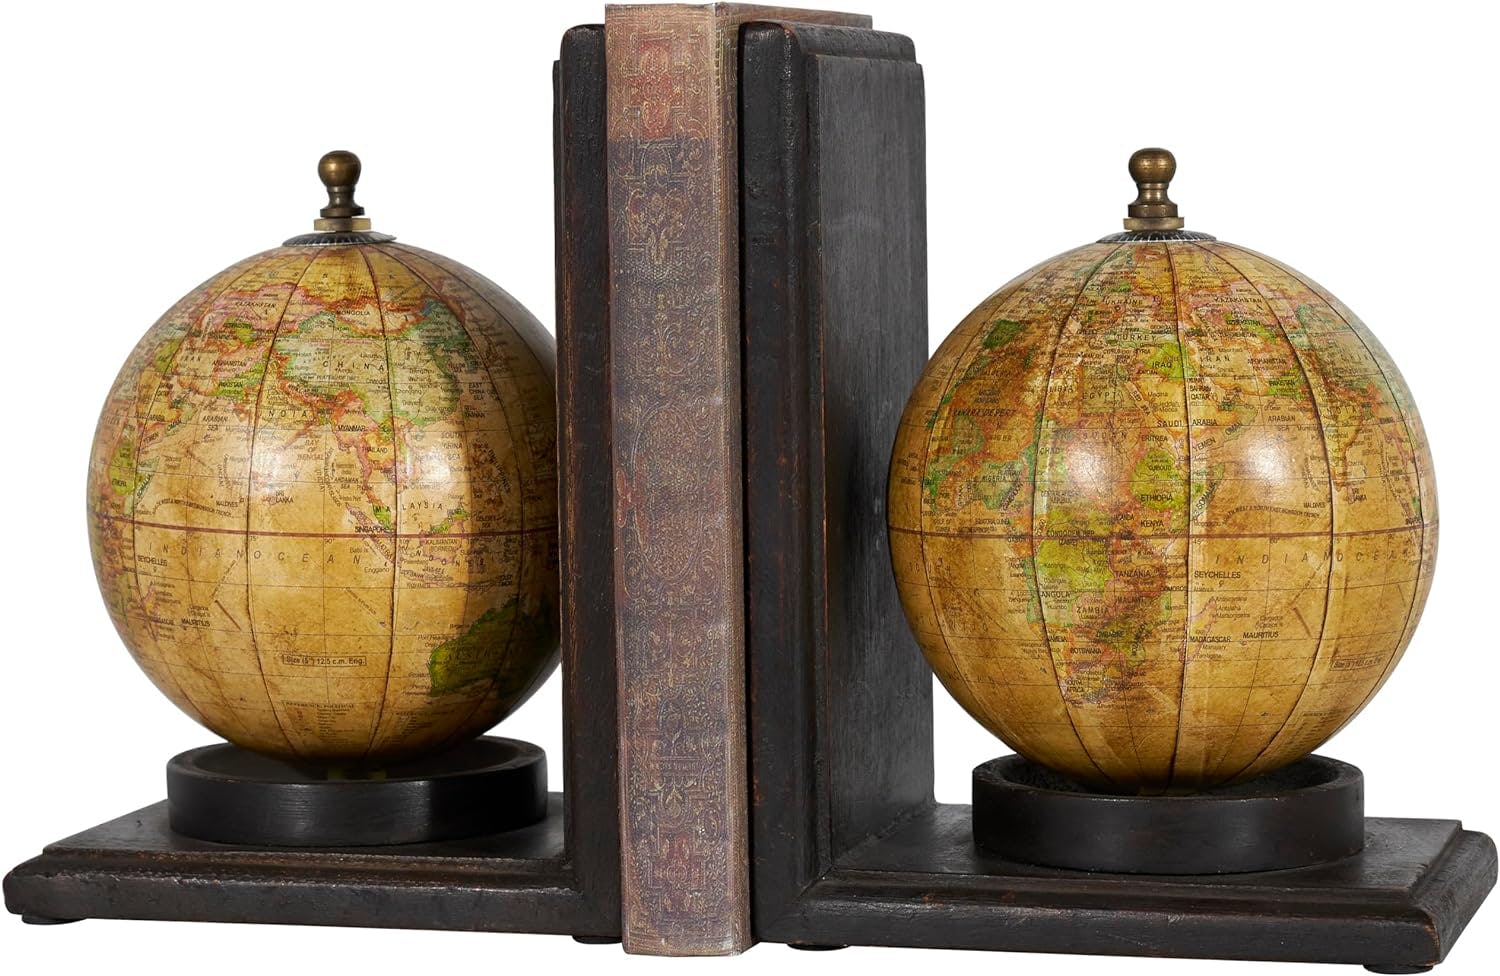 Elegant Sepia Globe Wooden Bookends with Metallic Accents, Set of 2